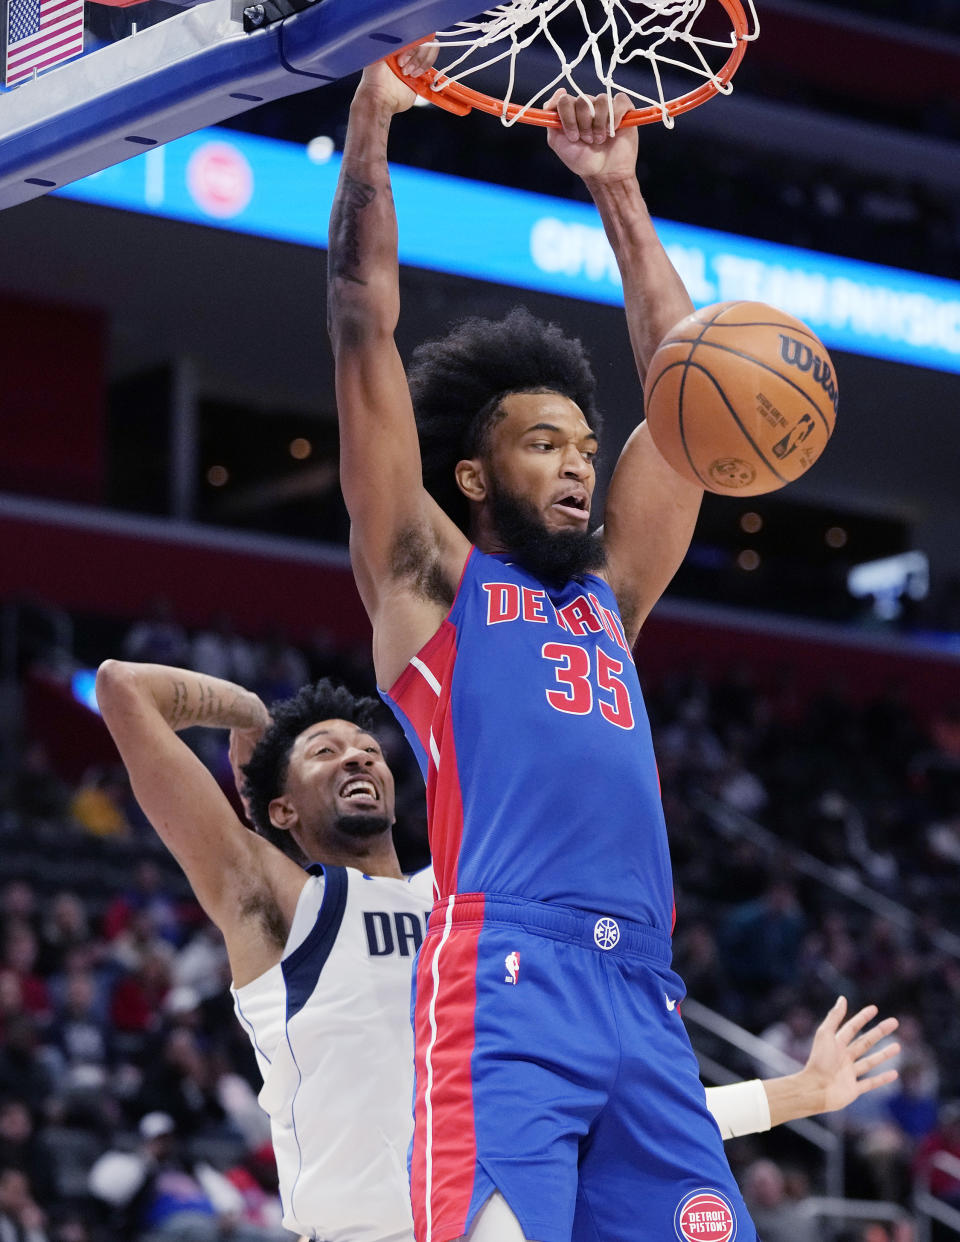 Detroit Pistons forward Marvin Bagley III (35) dunks as Dallas Mavericks center Christian Wood defends during the first half of an NBA basketball game, Thursday, Dec. 1, 2022, in Detroit. (AP Photo/Carlos Osorio)